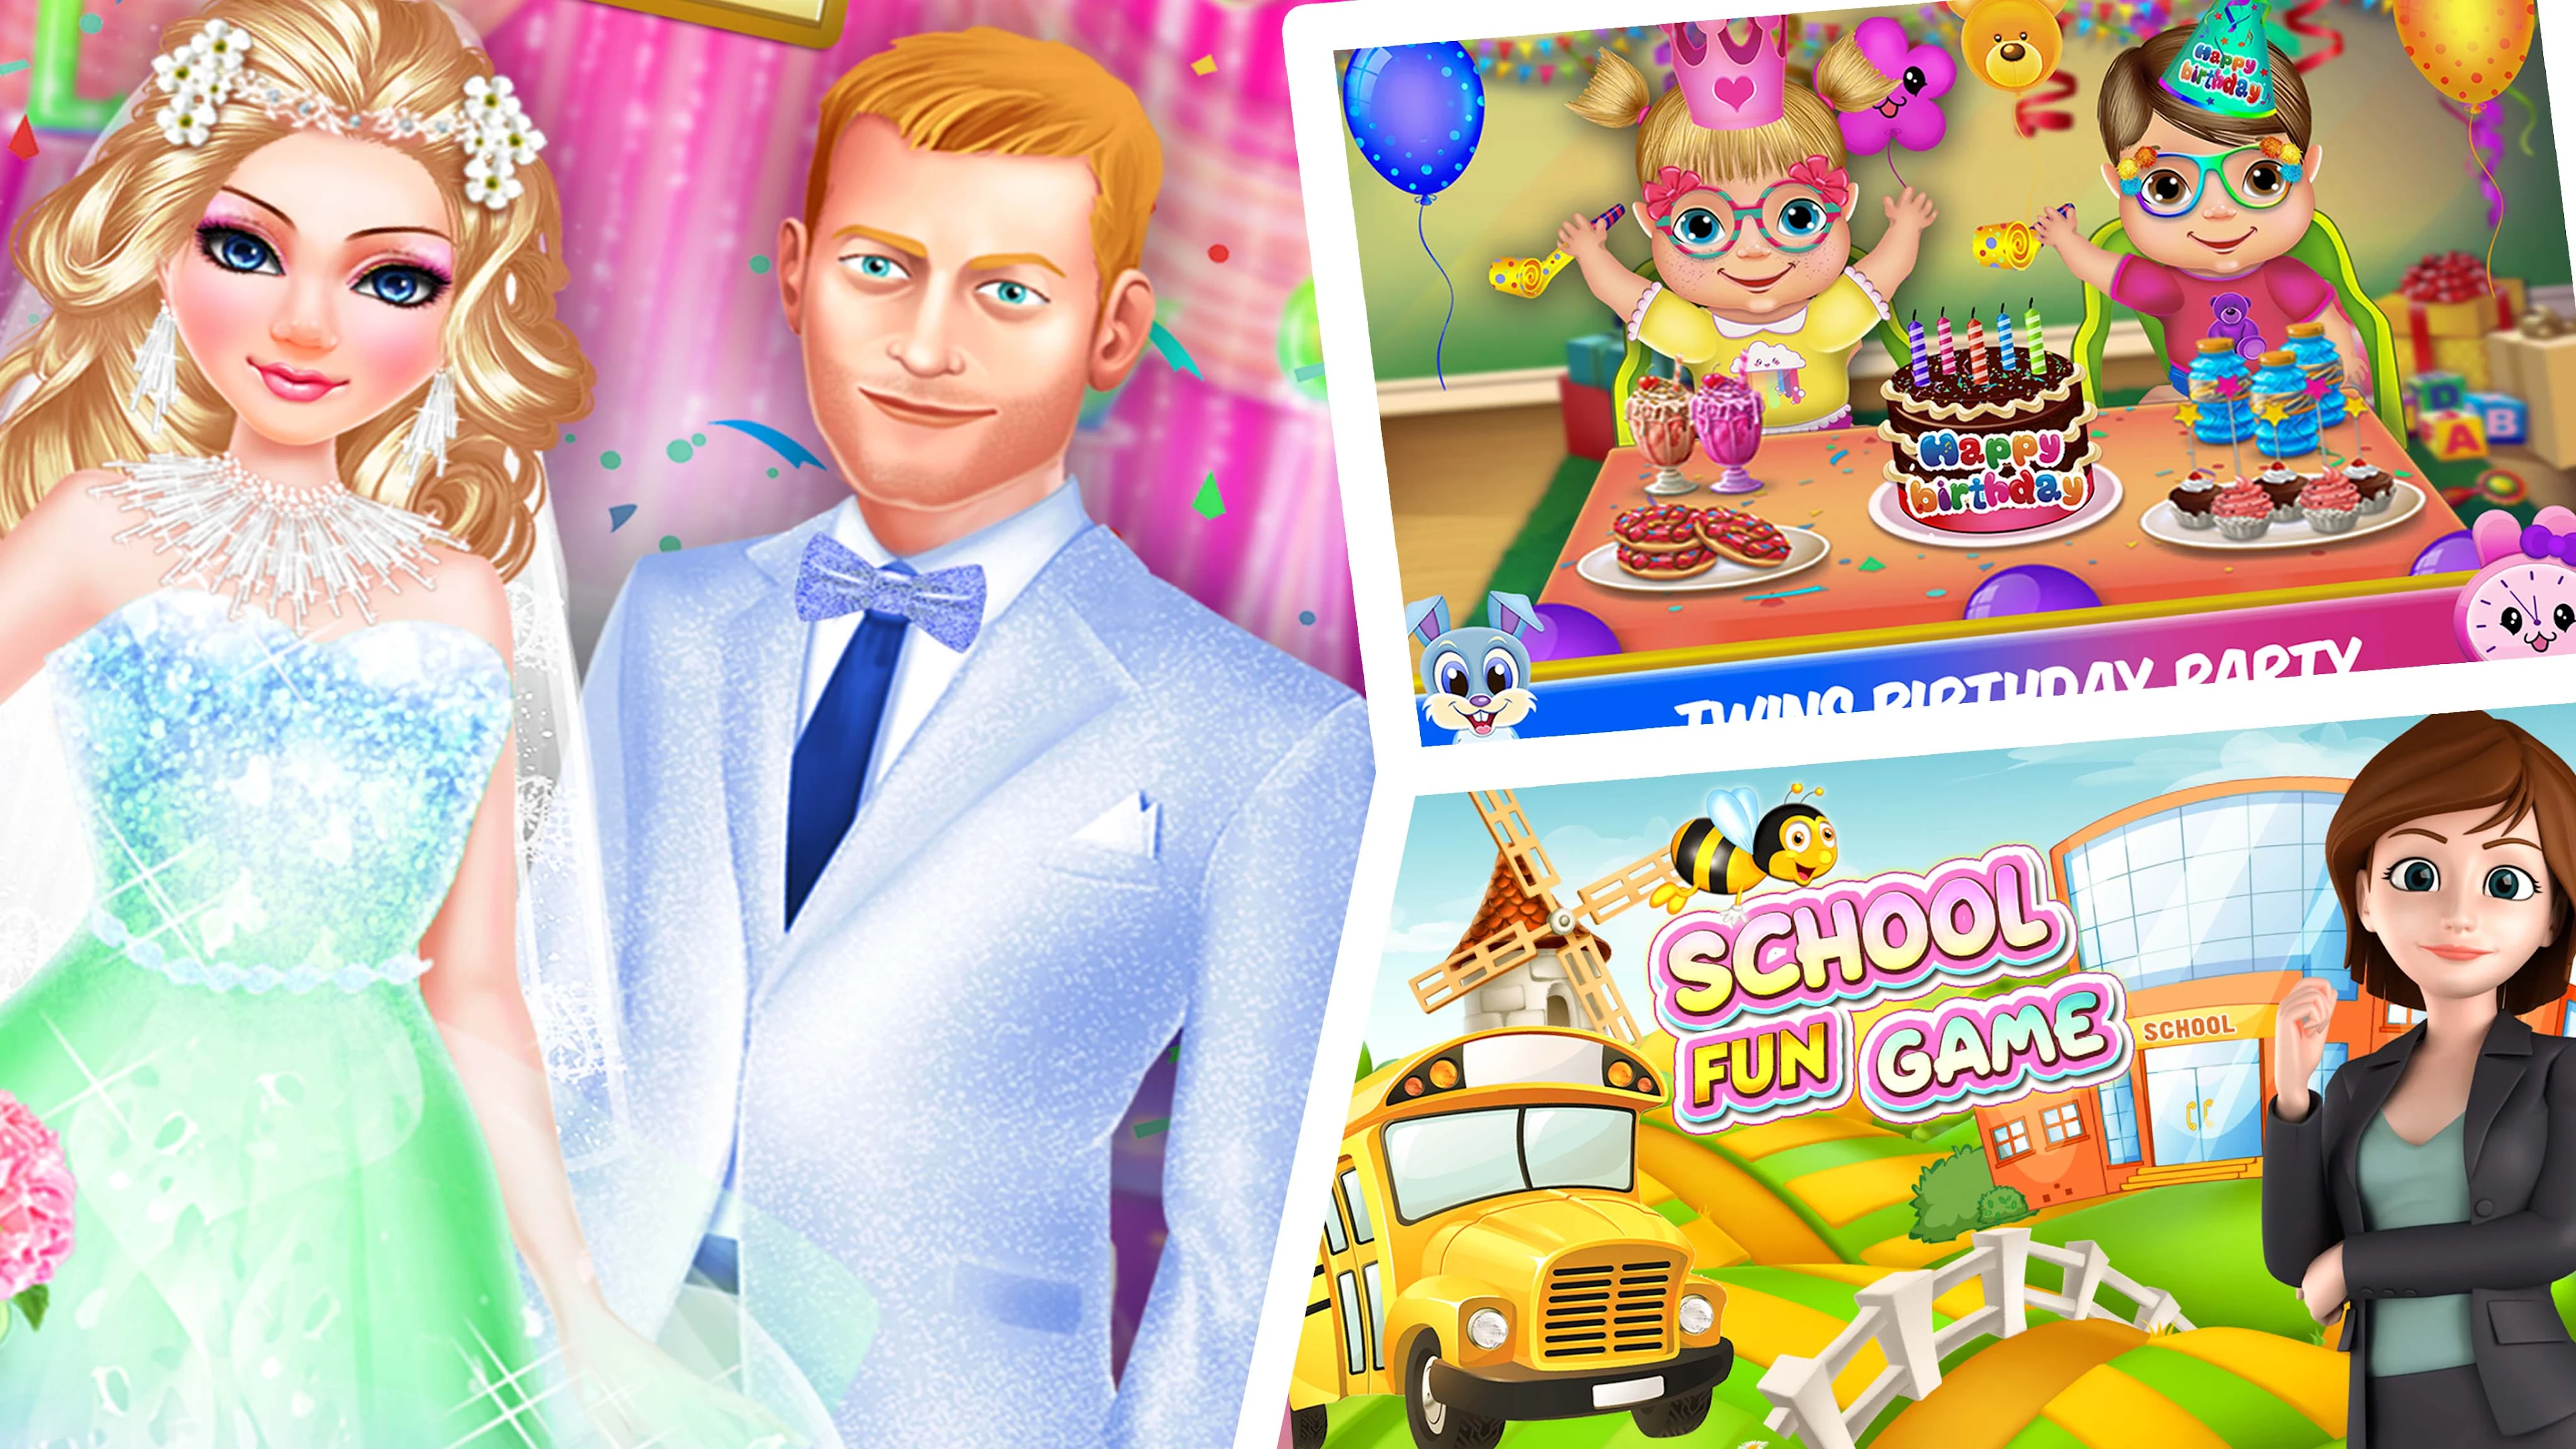 Apps Android no Google Play: Dress Up Makeover Girls Games